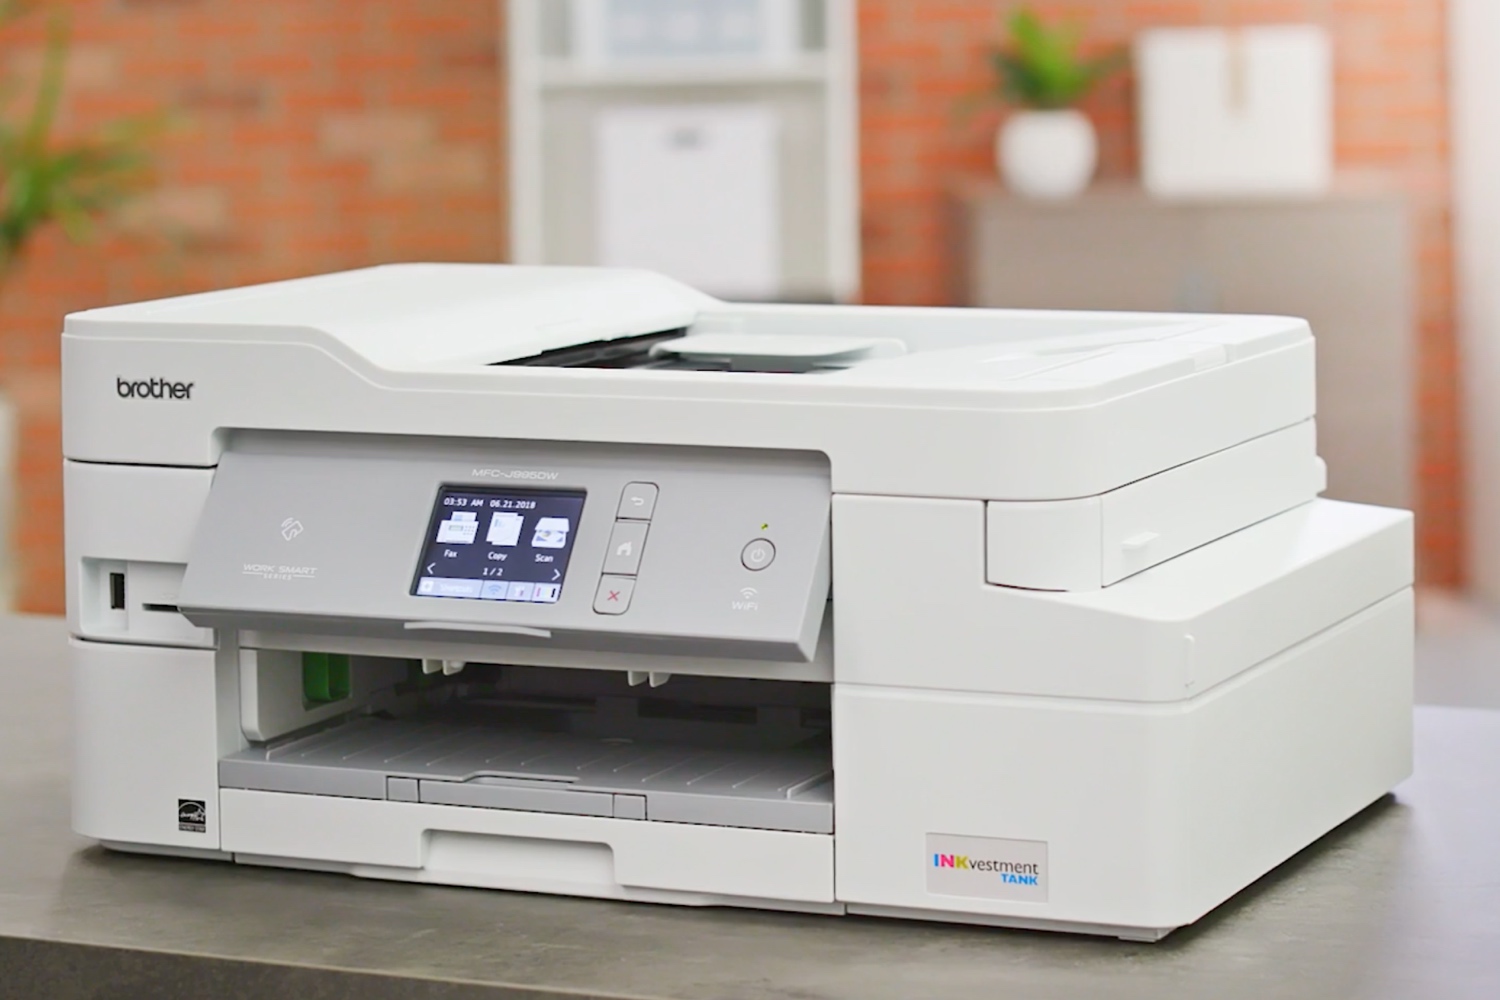 brother launches j995dw printer with inkvestment tank system